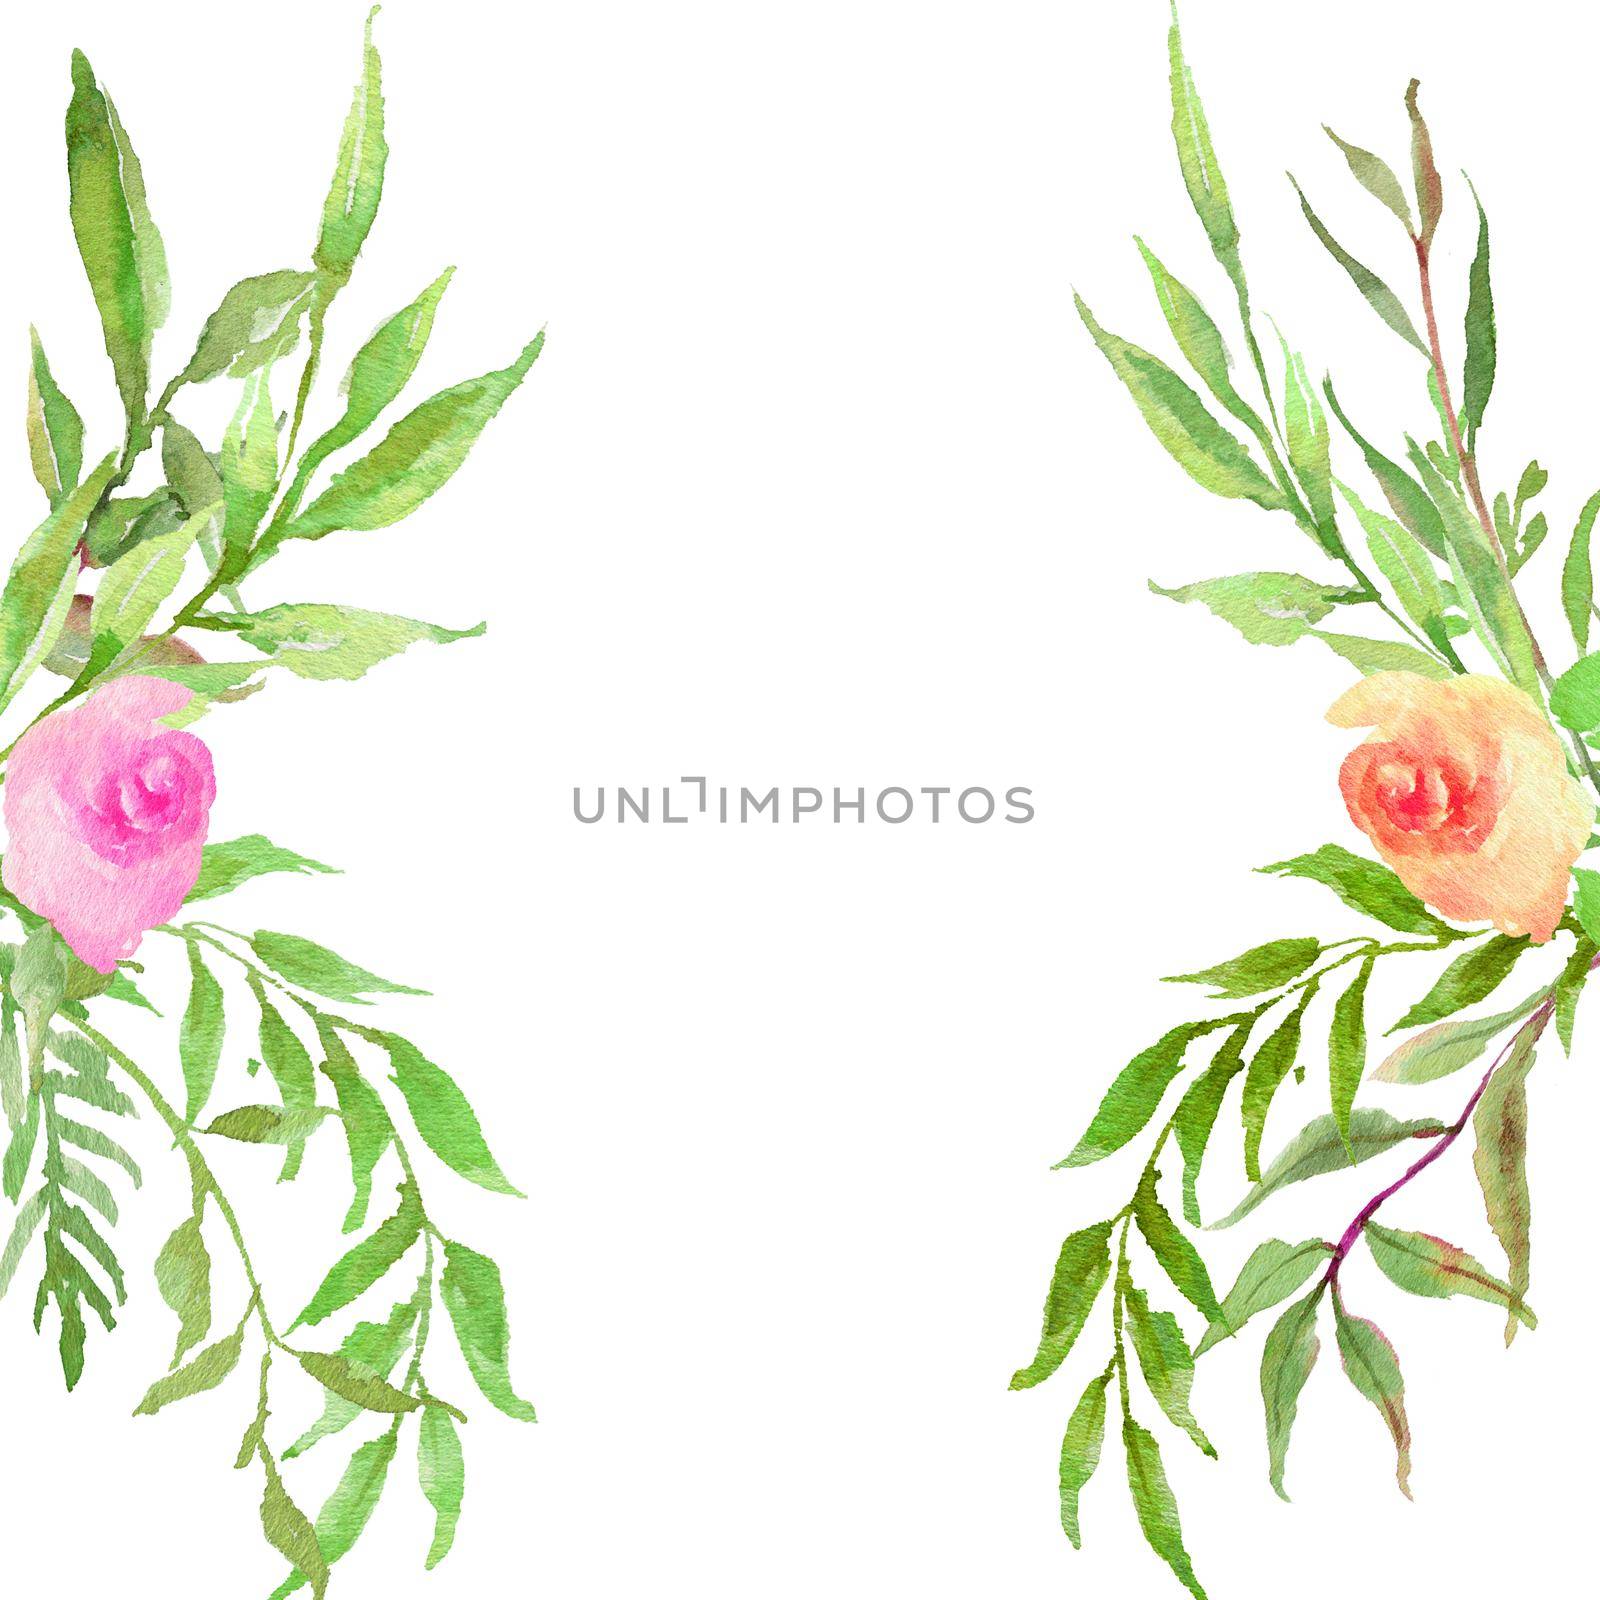 watercolor flower frame. Wreath, leaves and branches frame for your text on a white background.